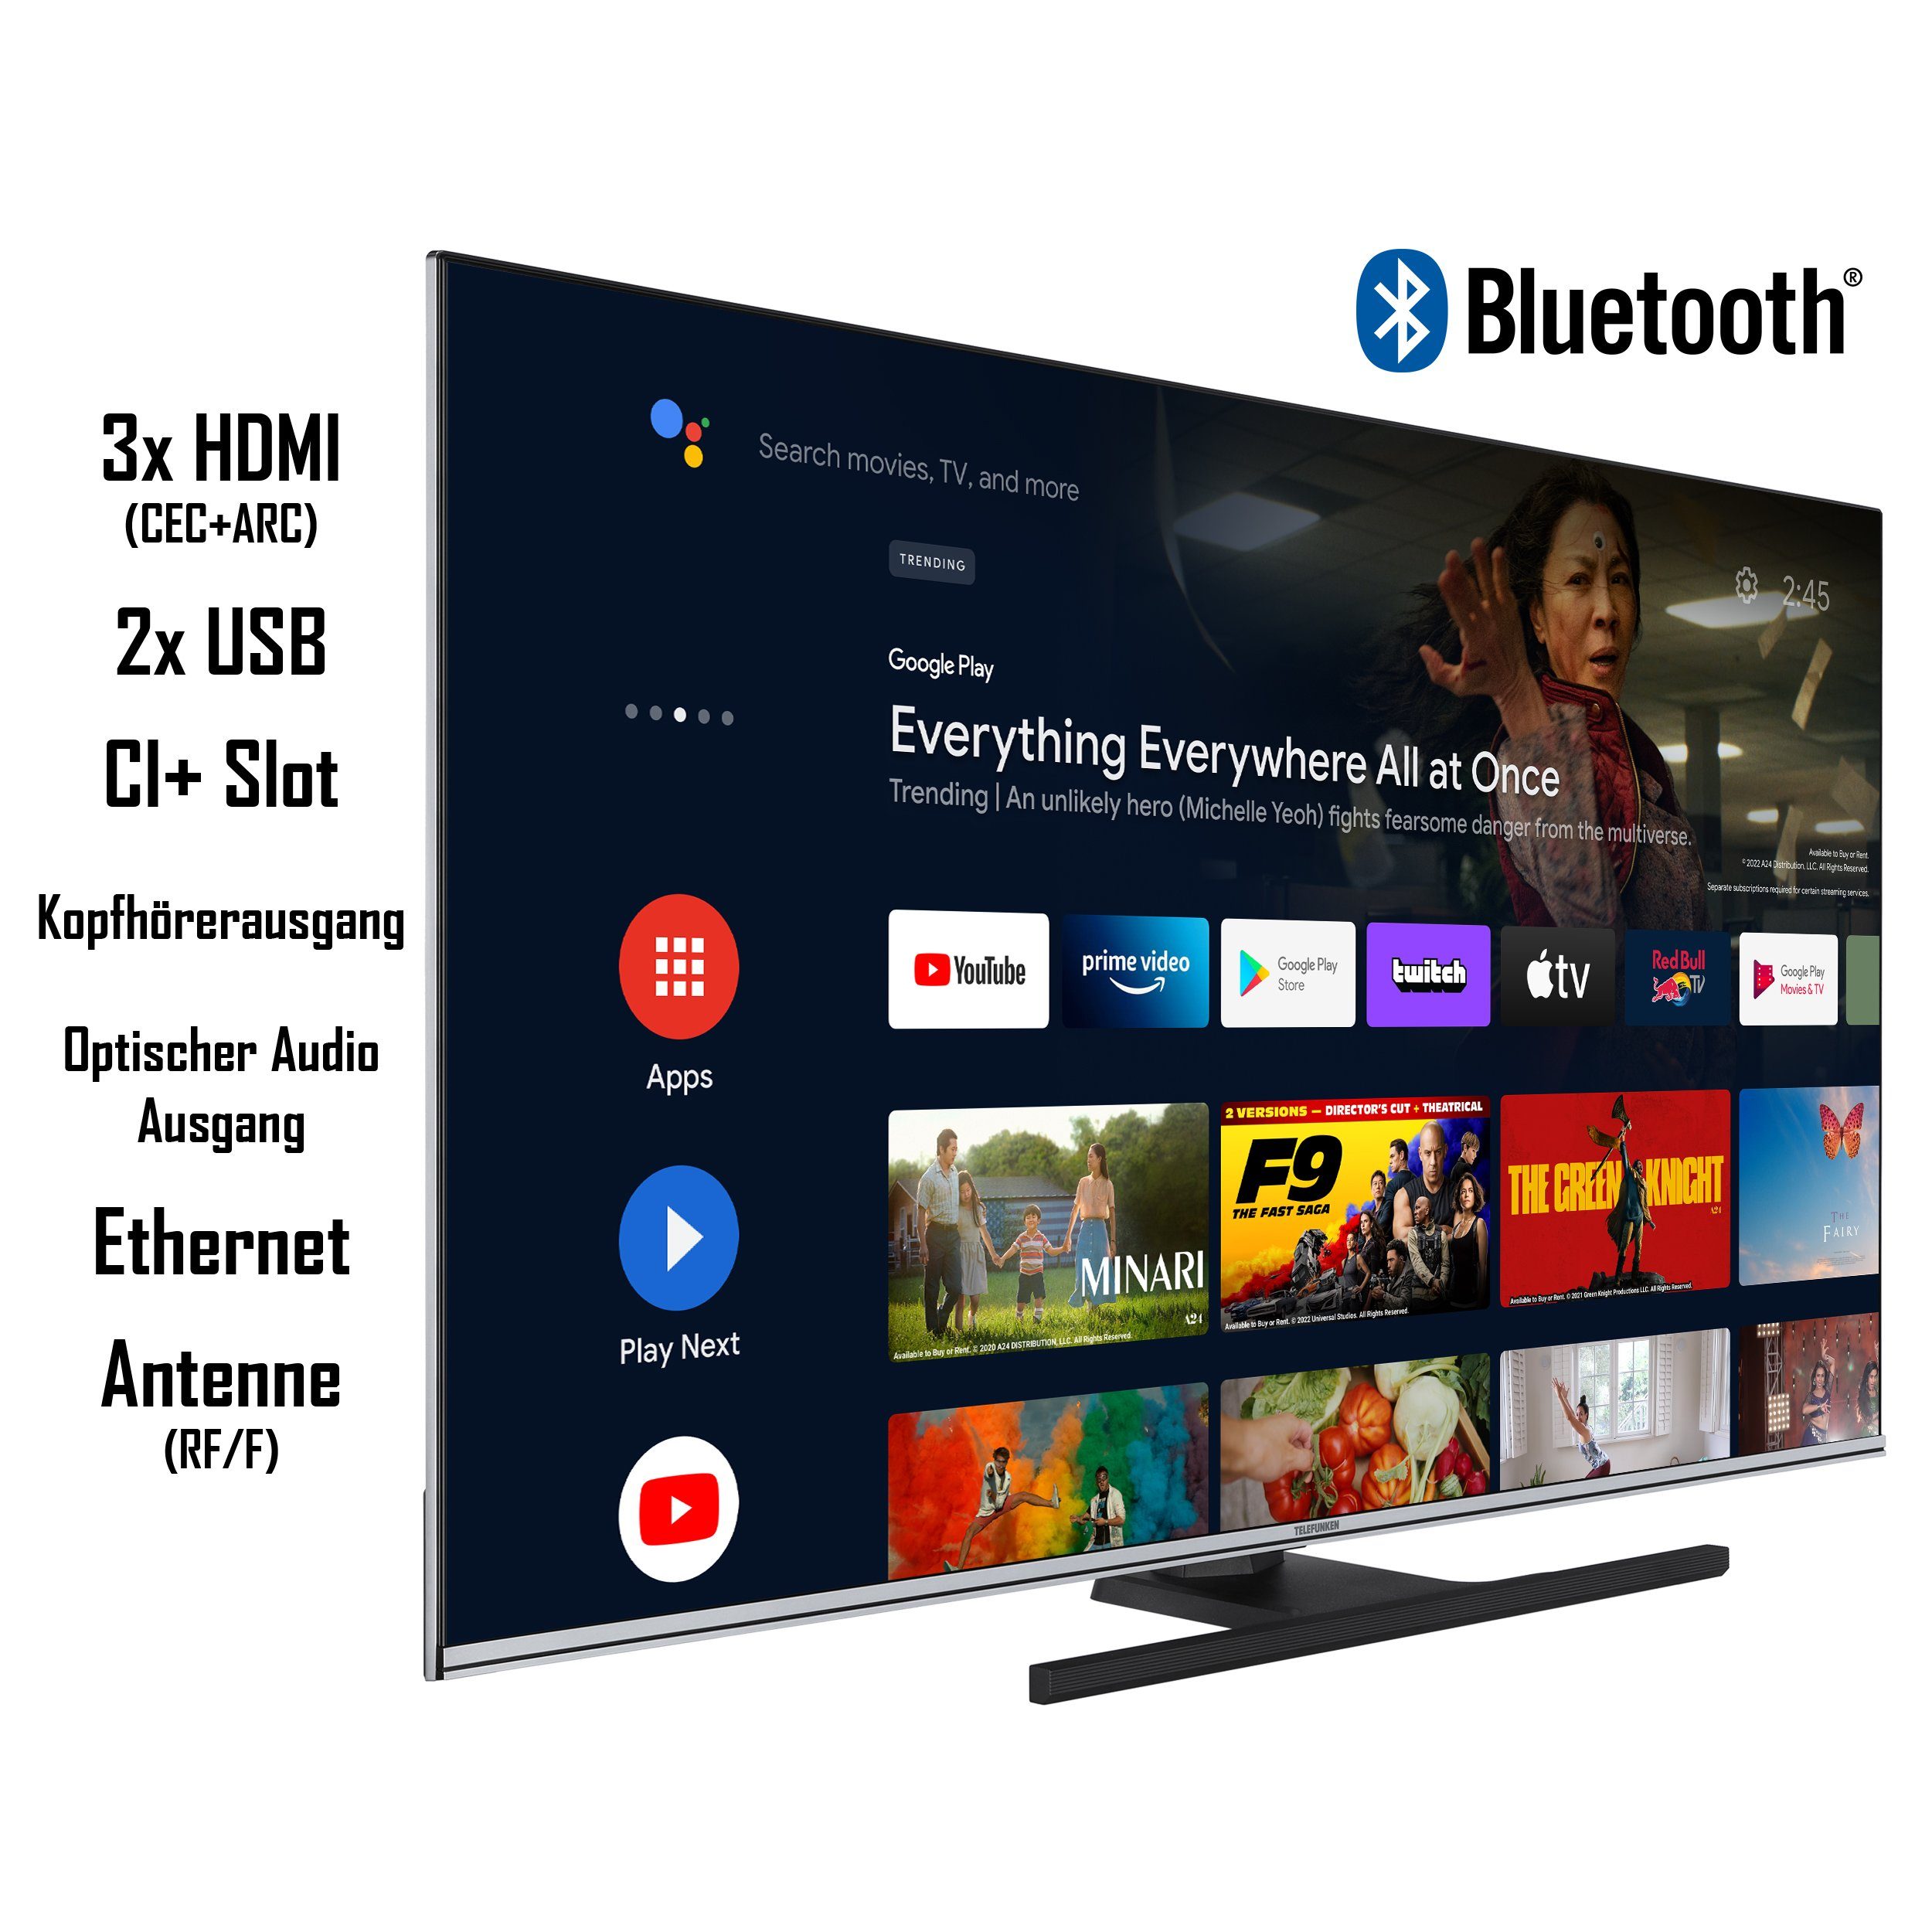 Dolby Vision, Android TV, HD, cm/50 Bluetooth, Telefunken Ultra (126 Dolby TV, Smart Atmos) QLED-Fernseher HDR Triple-Tuner, QU50AN900M Zoll, 4K